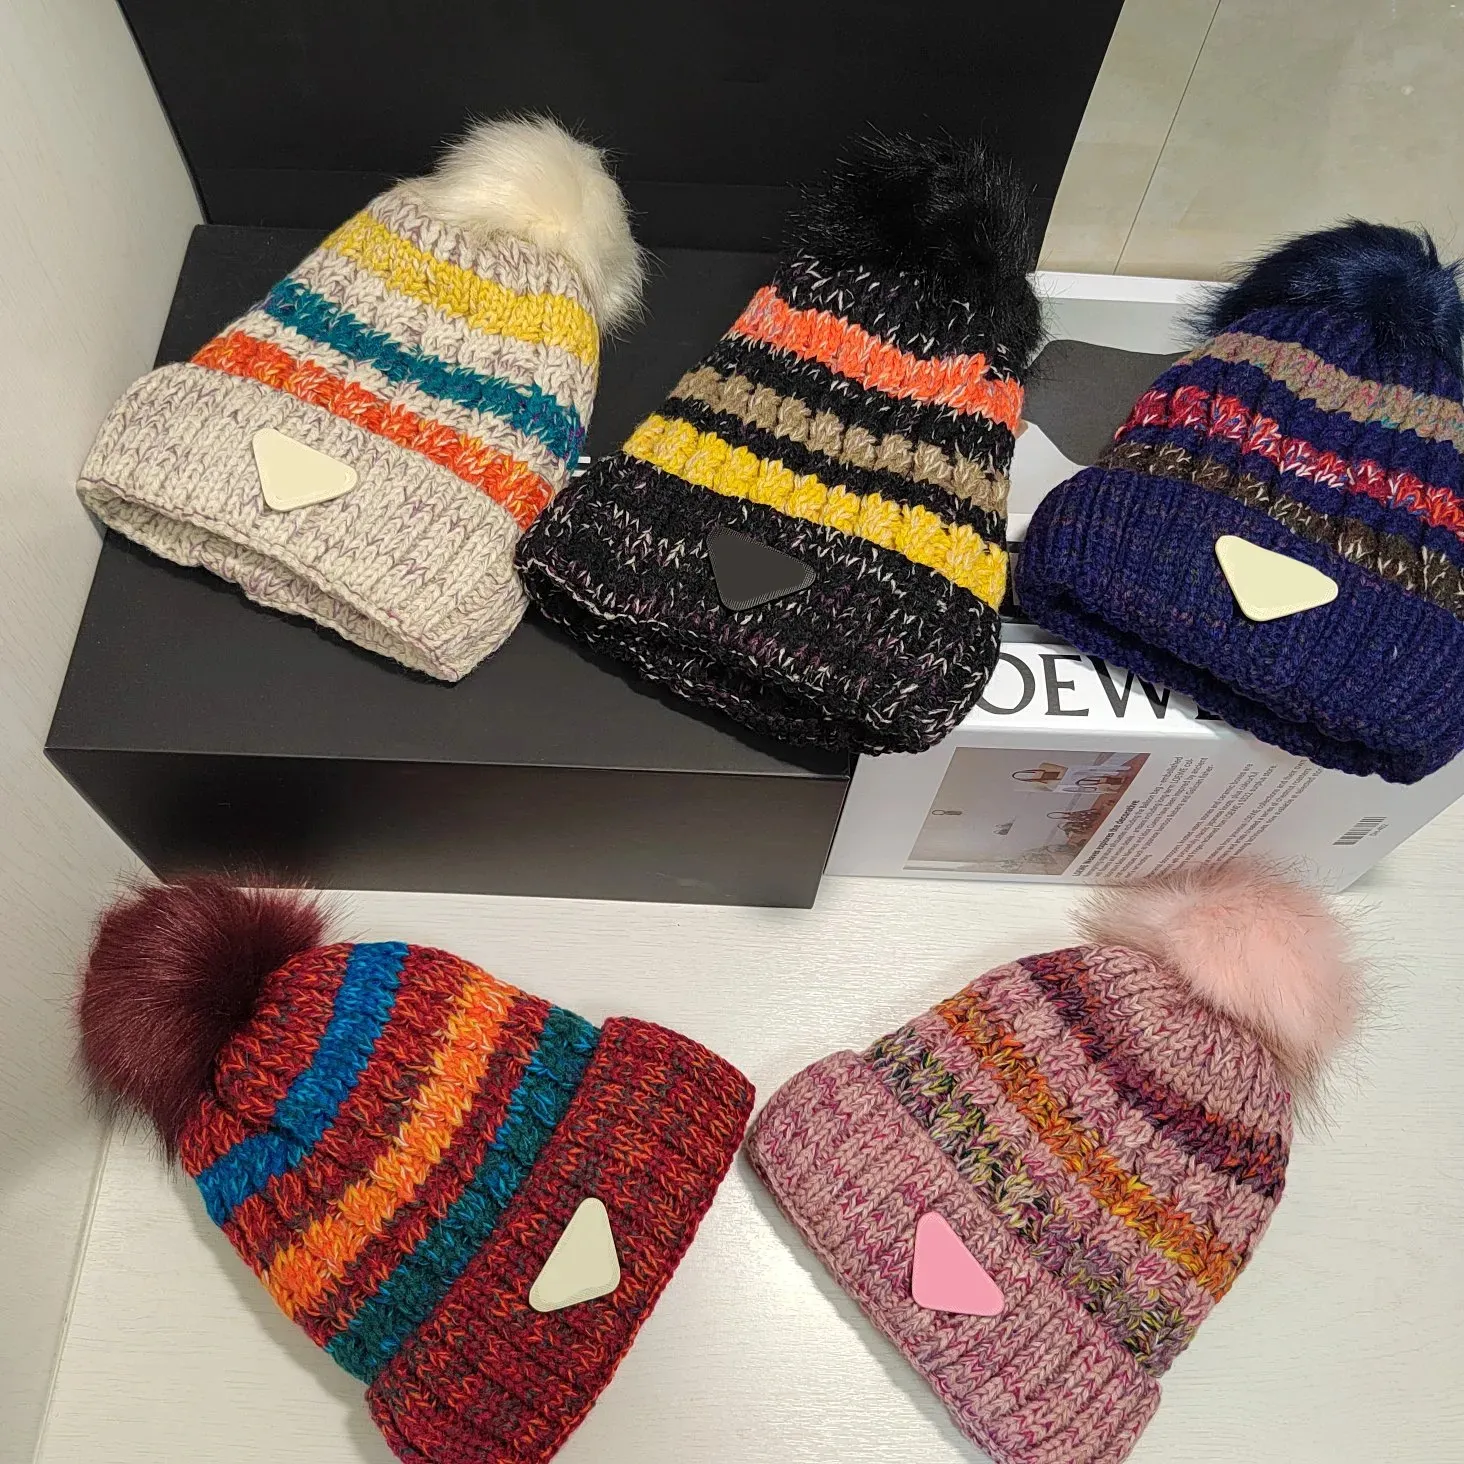 Hats Designer hats Santa hats Cashmere thick knit men's hats Trend explosion wool hats Ladies hats all bring warmth777